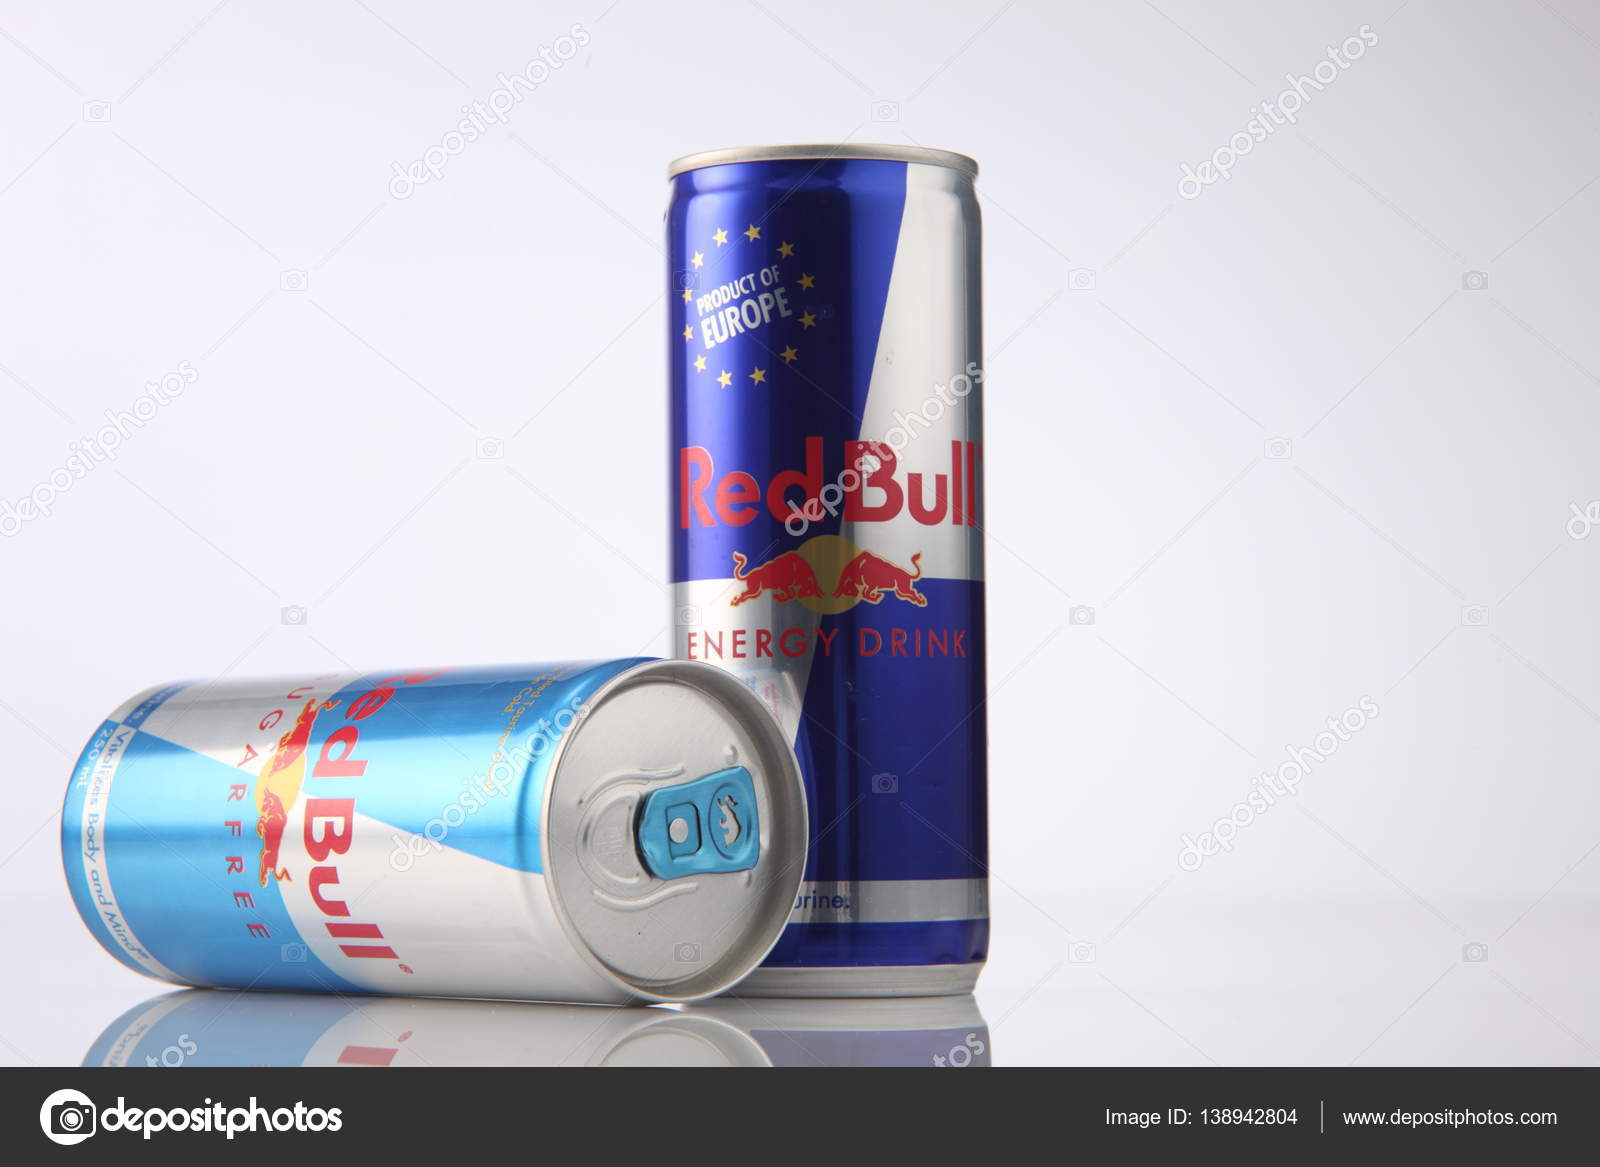 Red bull group of aluminum cans – Stock Photo eskaylim #138942804